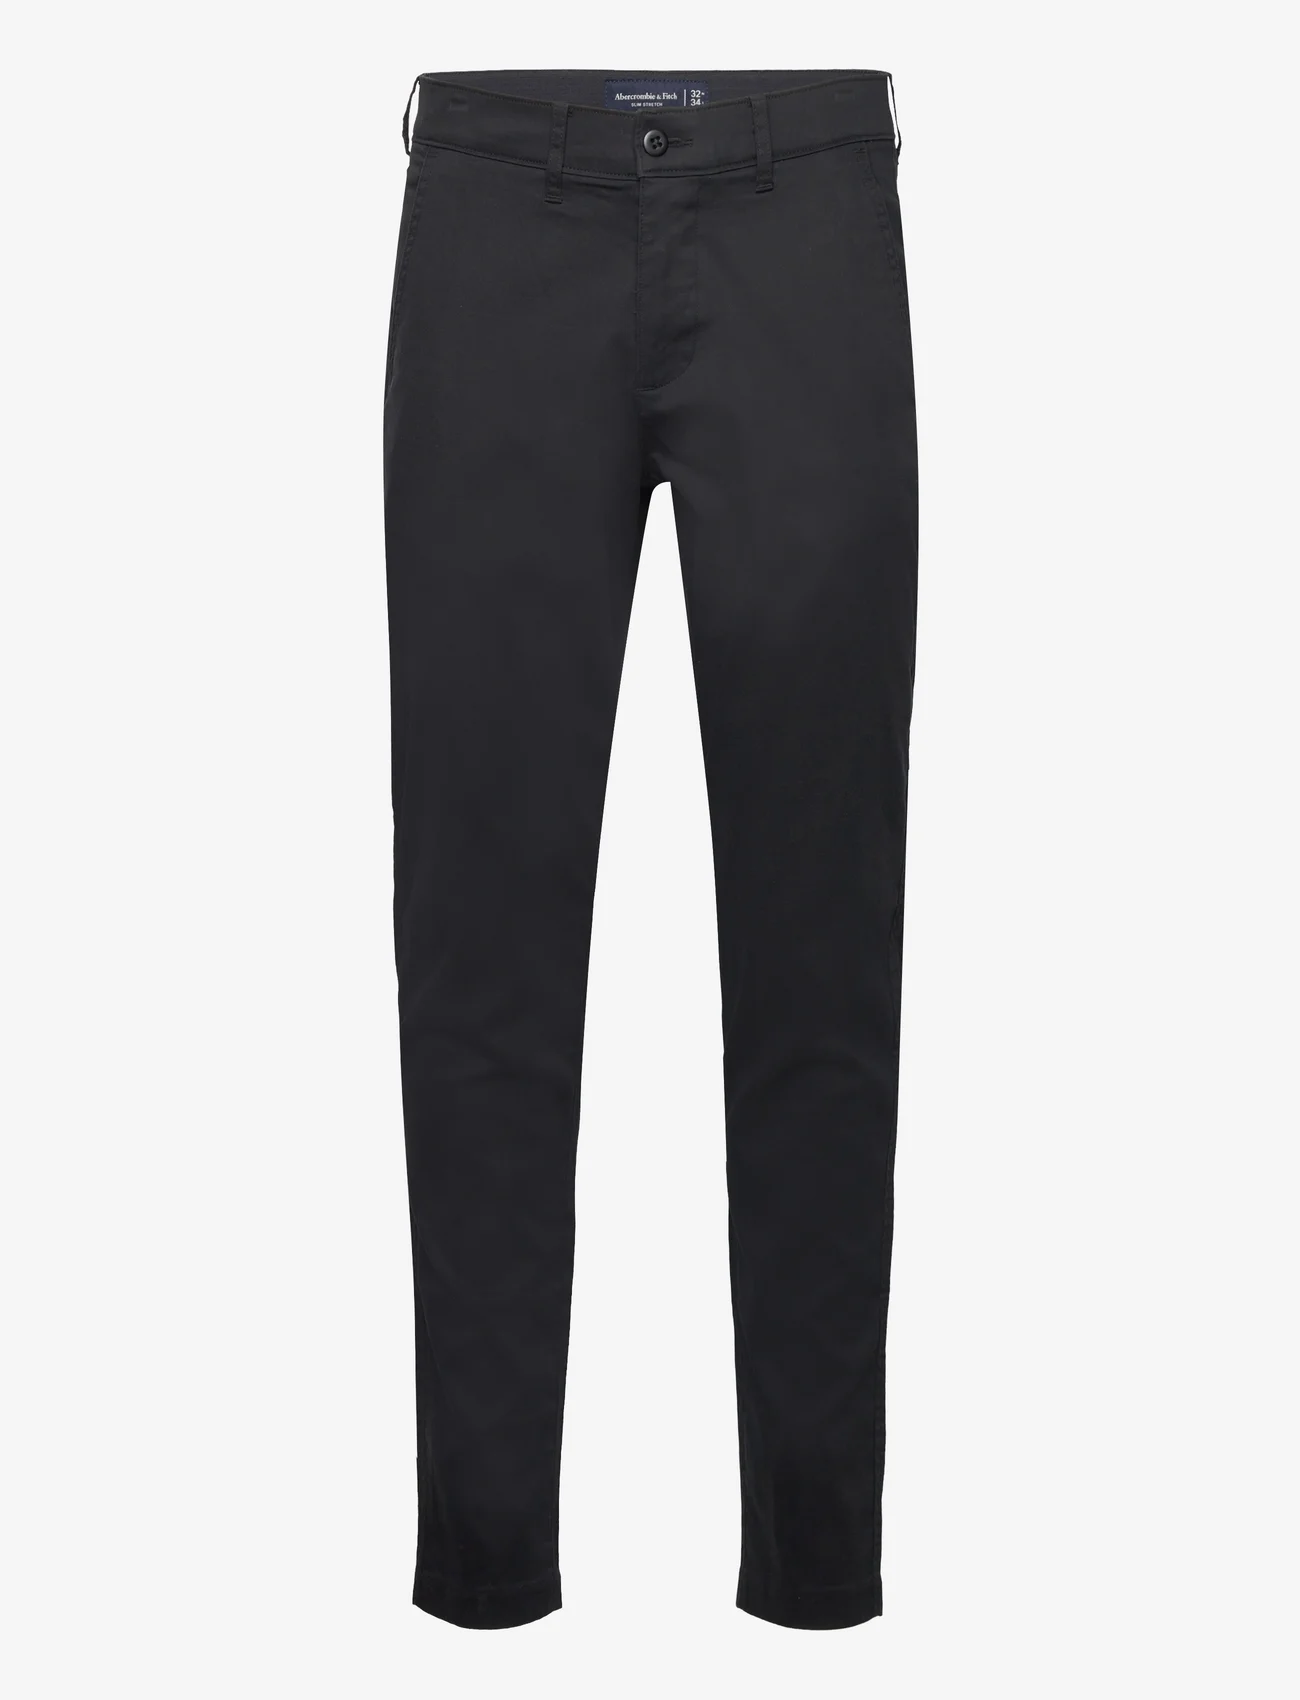 Abercrombie & Fitch - ANF MENS PANTS - chino's - casual black - 0